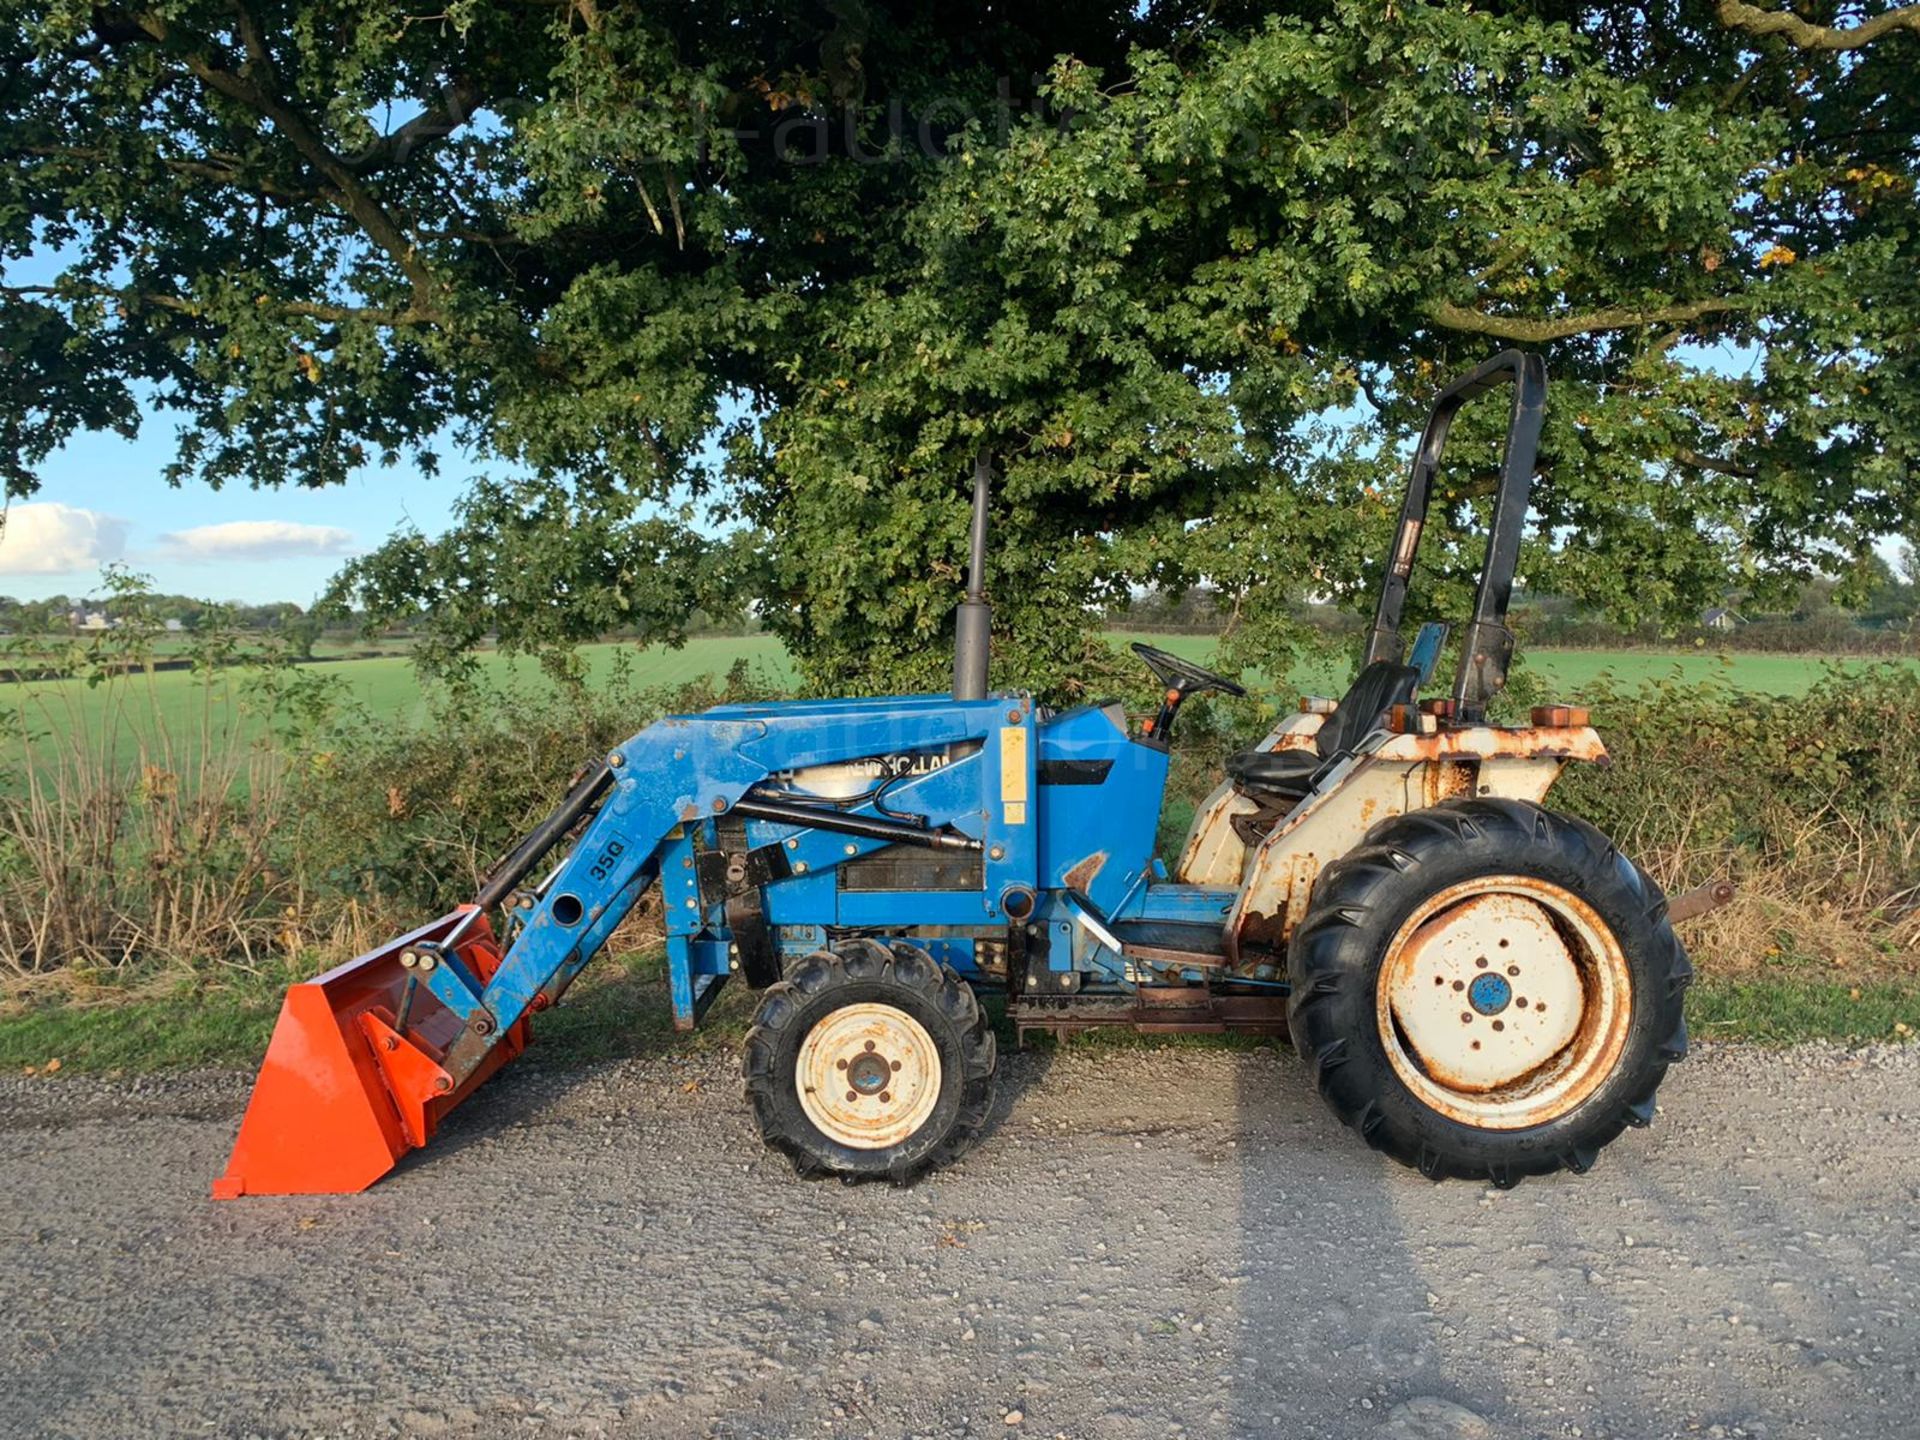 FORD 1720 28hp 4WD COMPACT TRACTOR WITH LEWIS 35Q FRONT LOADER AND BUCKET, RUNS DRIVES LIFTS WELL - Image 5 of 11